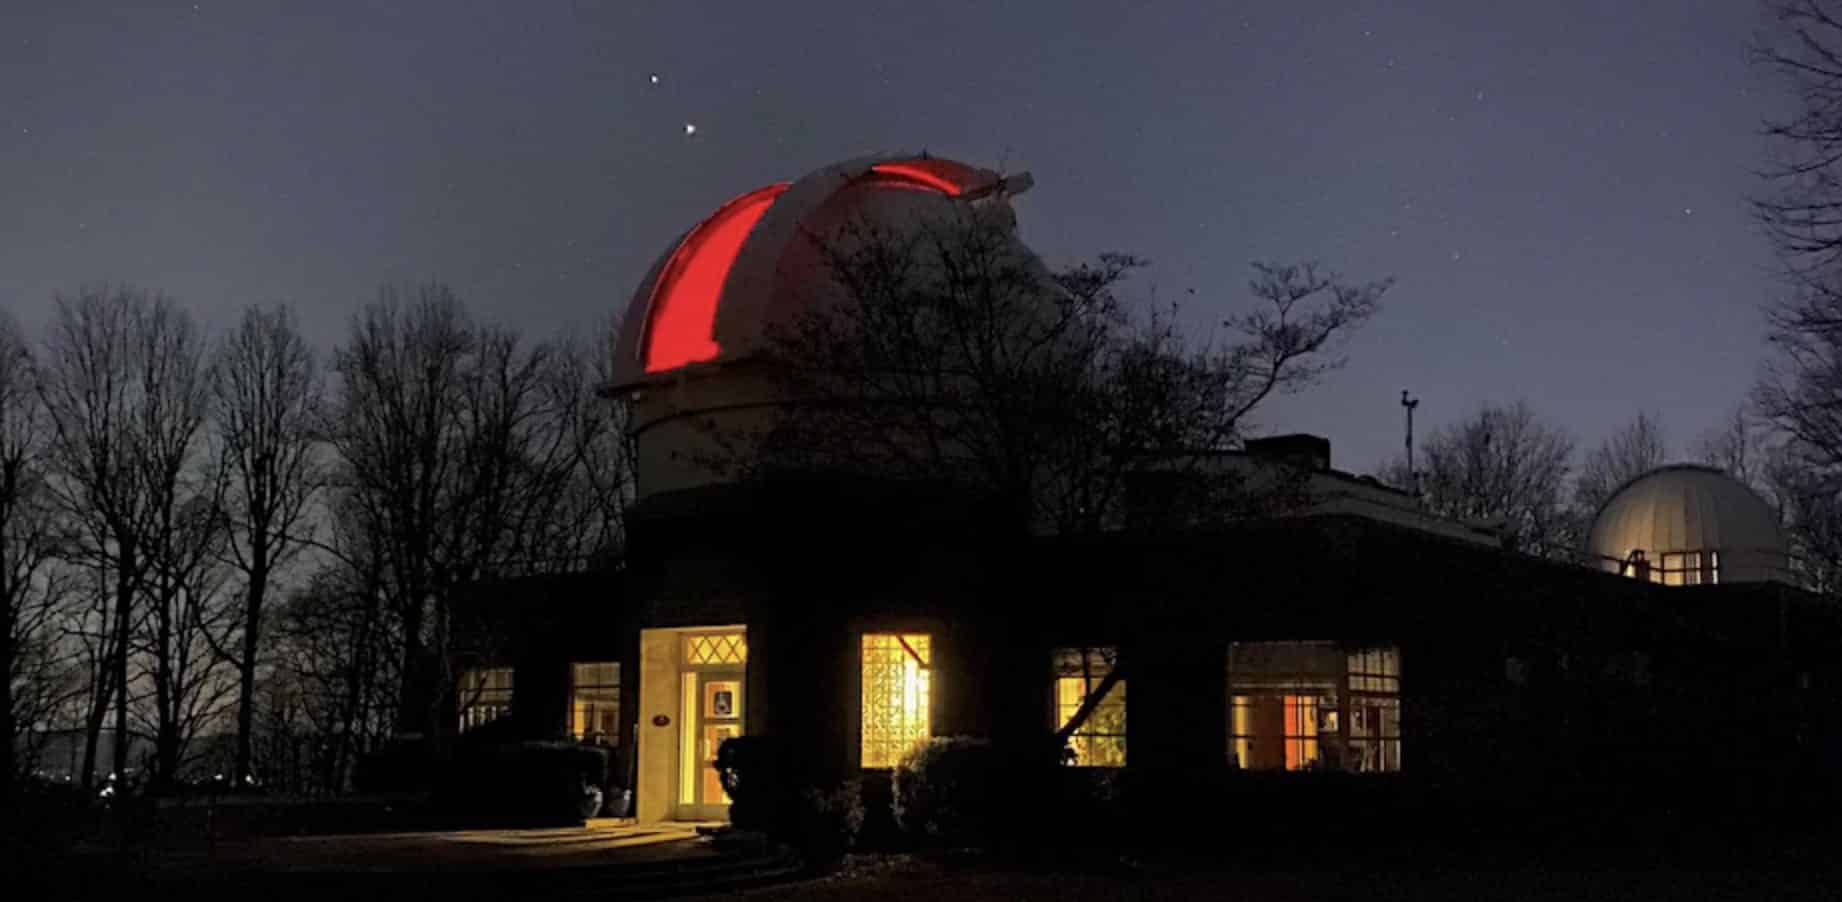 LIVE Telescope Night in Brentwood at the Vanderbilt Dyer Observatory.